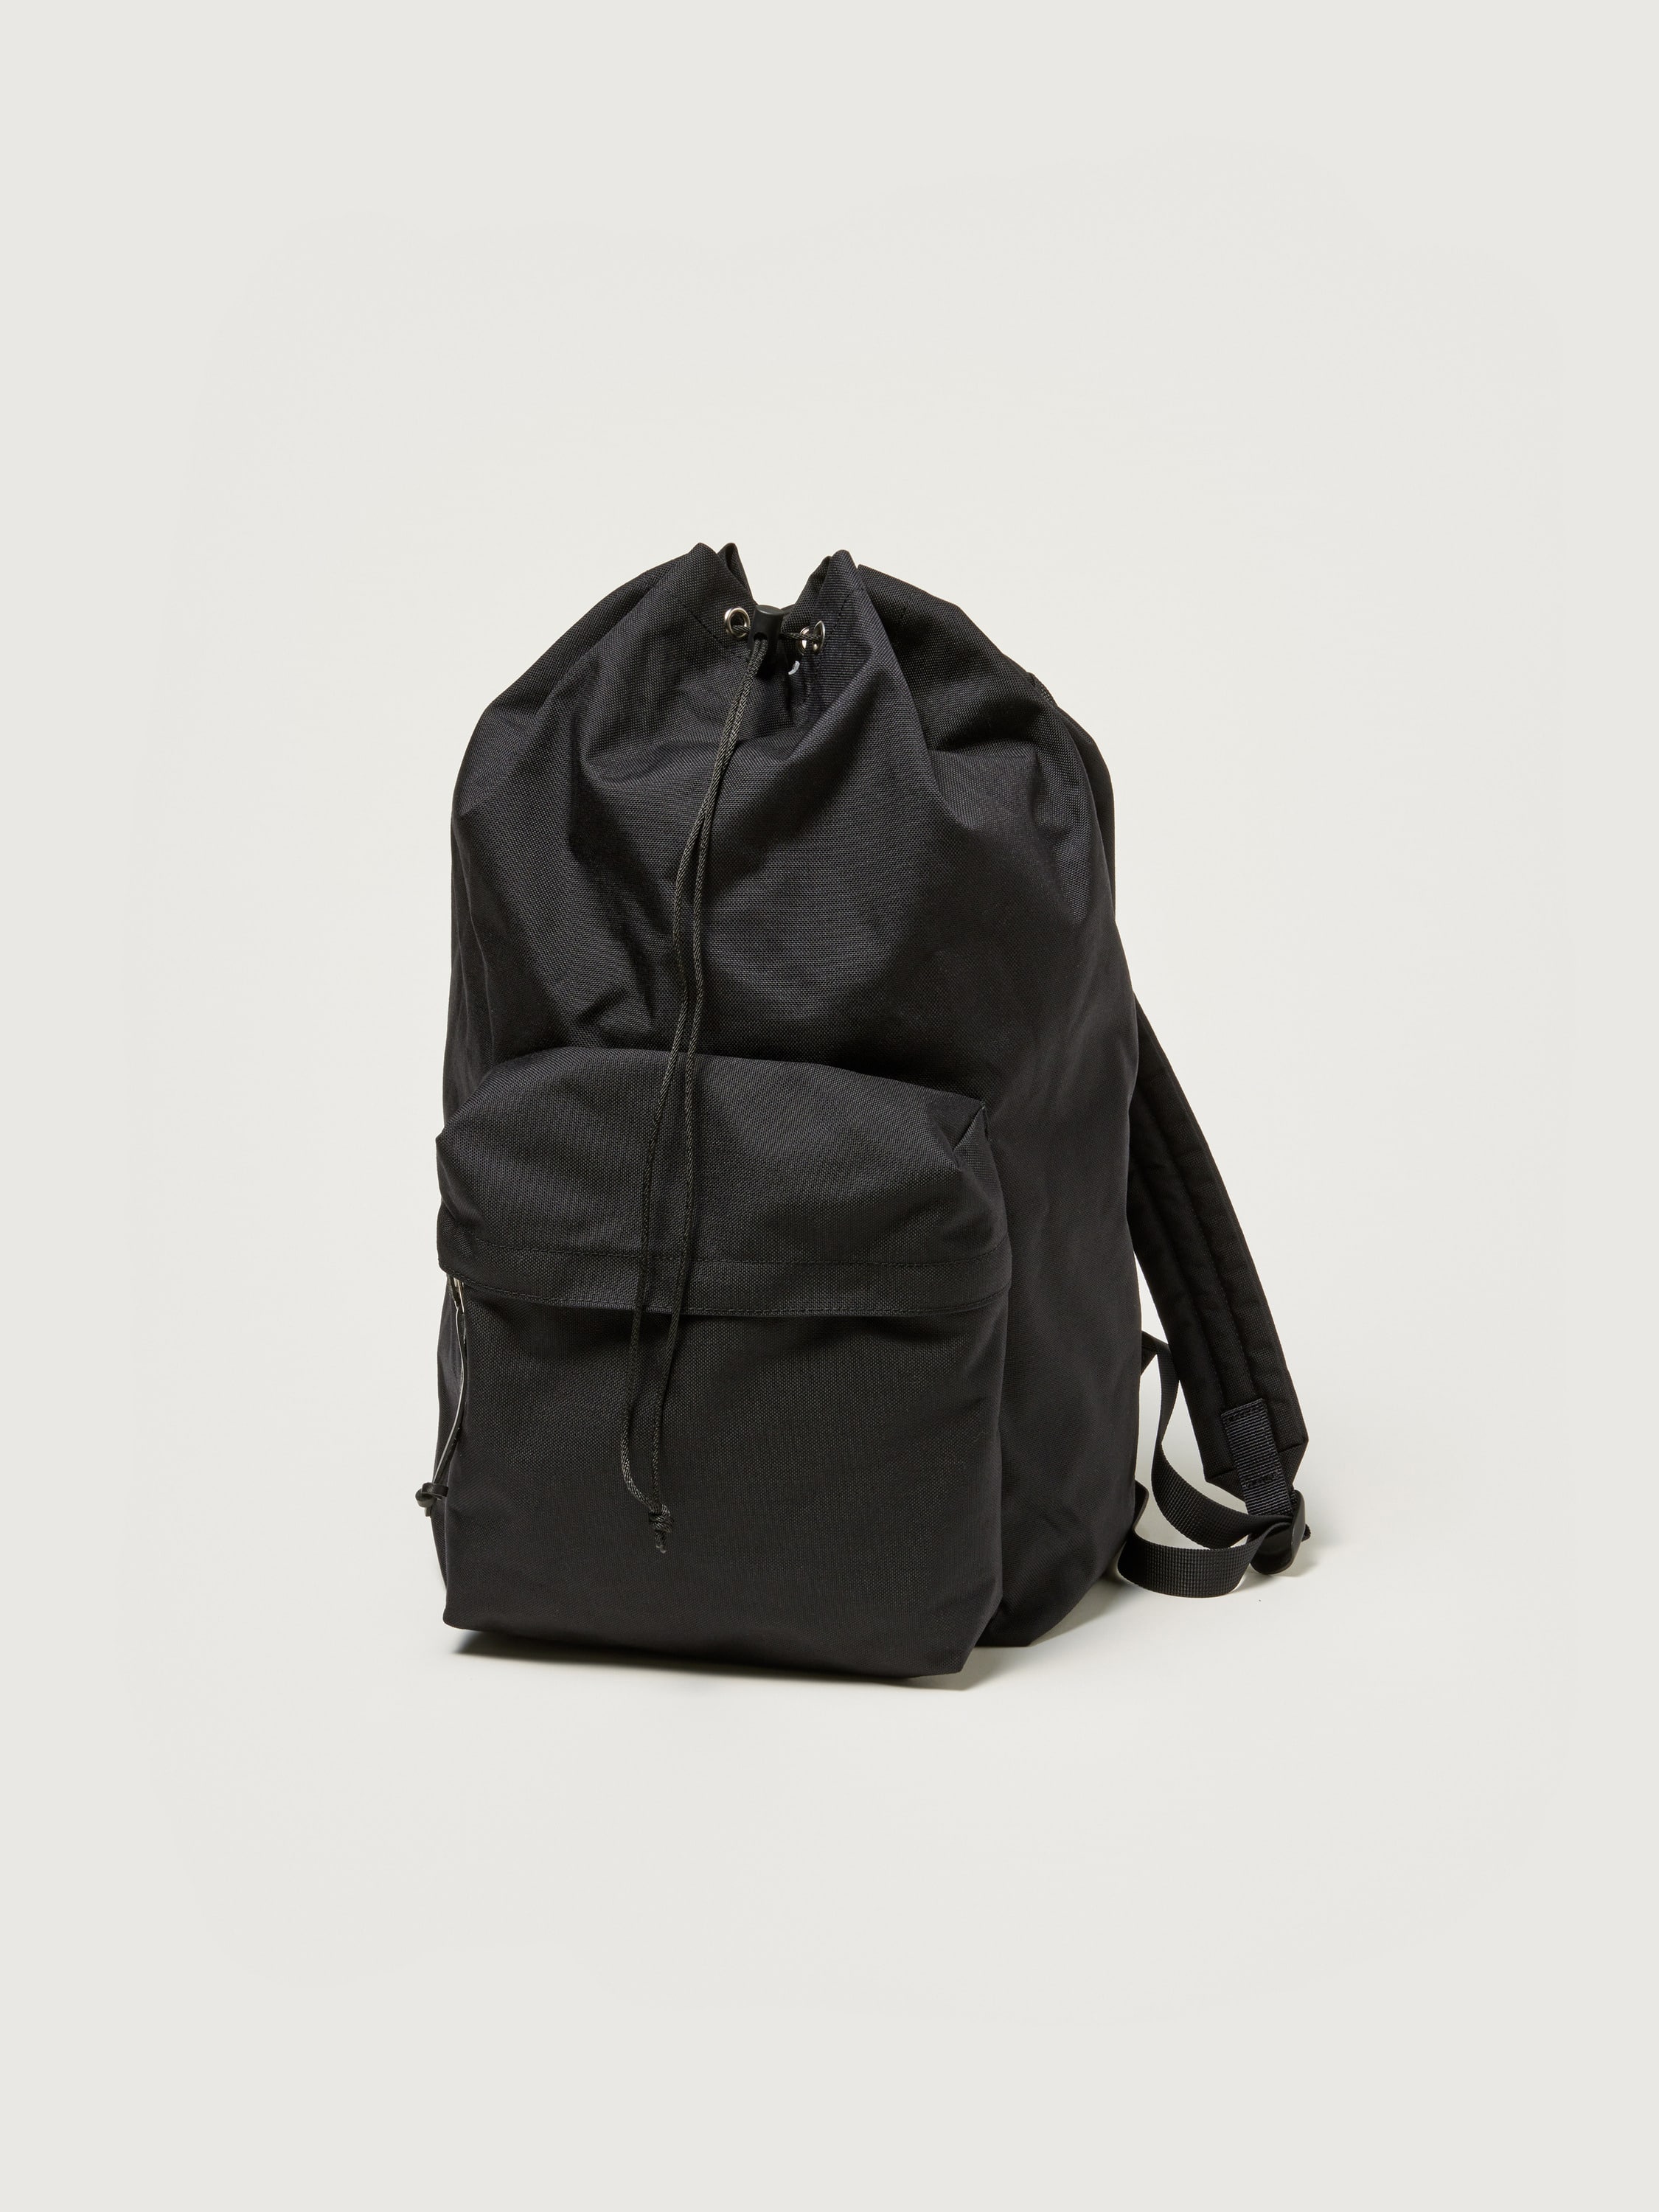 LARGE BACKPACK SET MADE BY AETA 詳細画像 BLACK 3